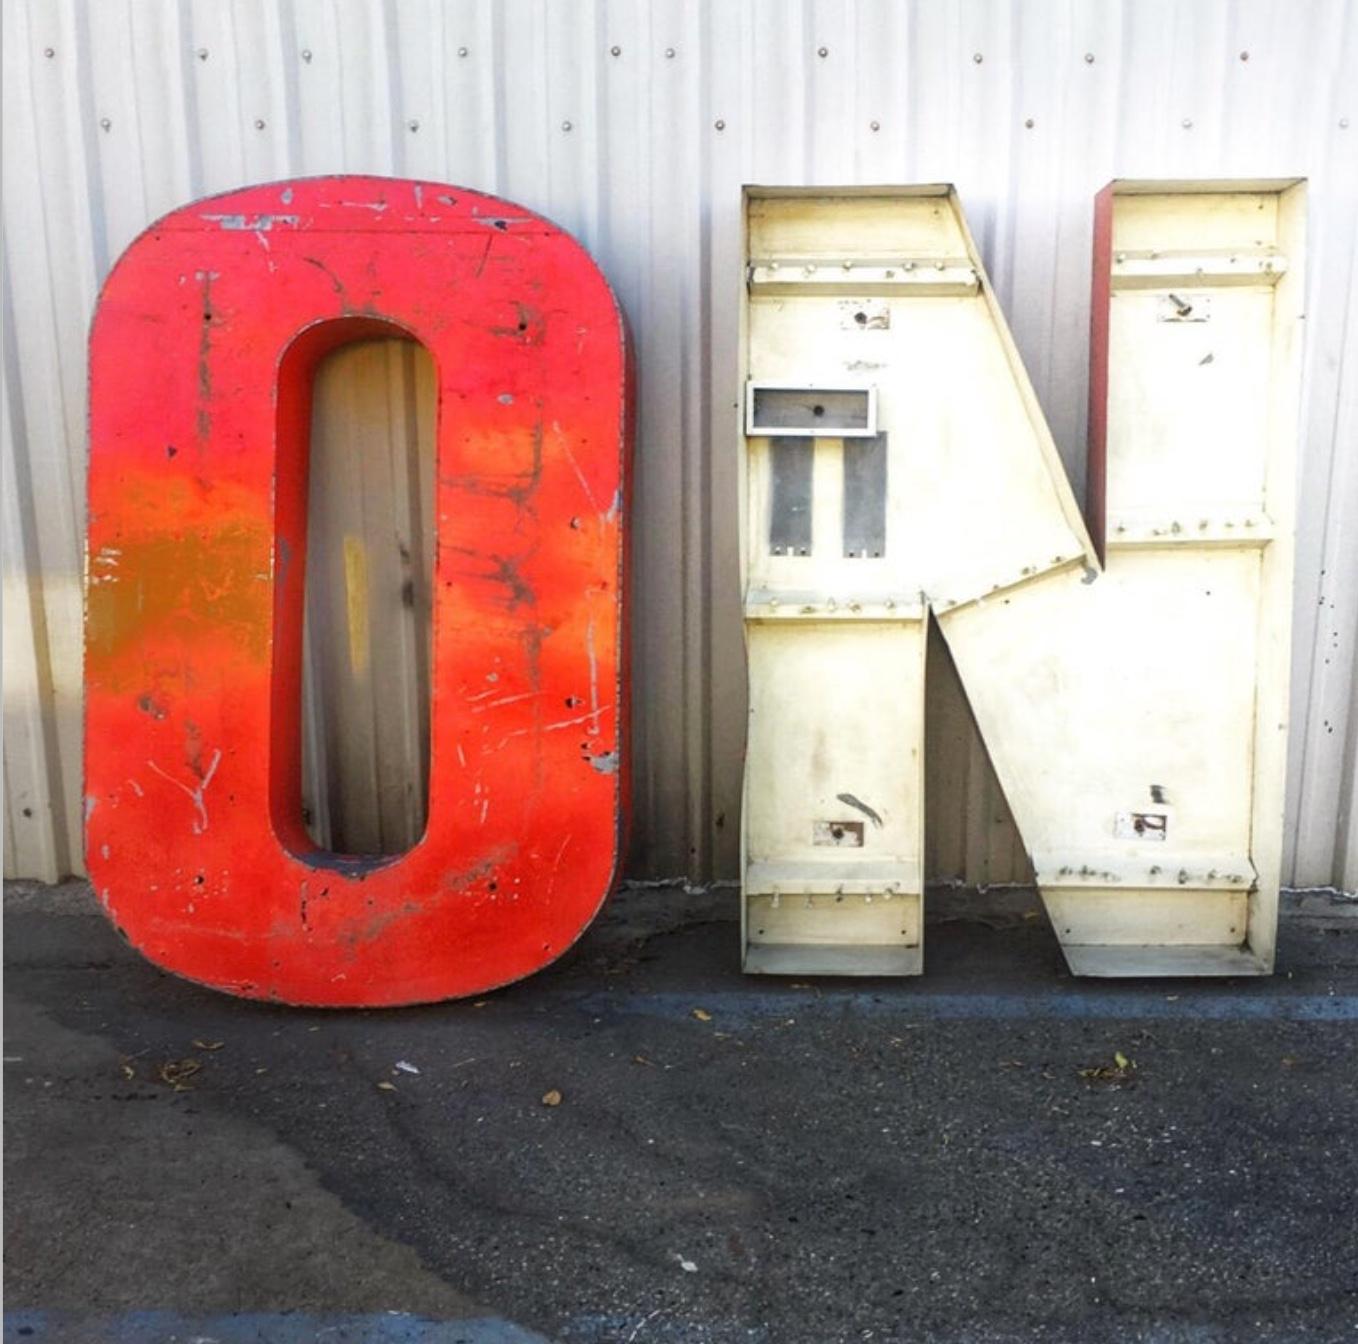 Huge weathered on industrial sign. Very cool.

Dimensions are per letter.